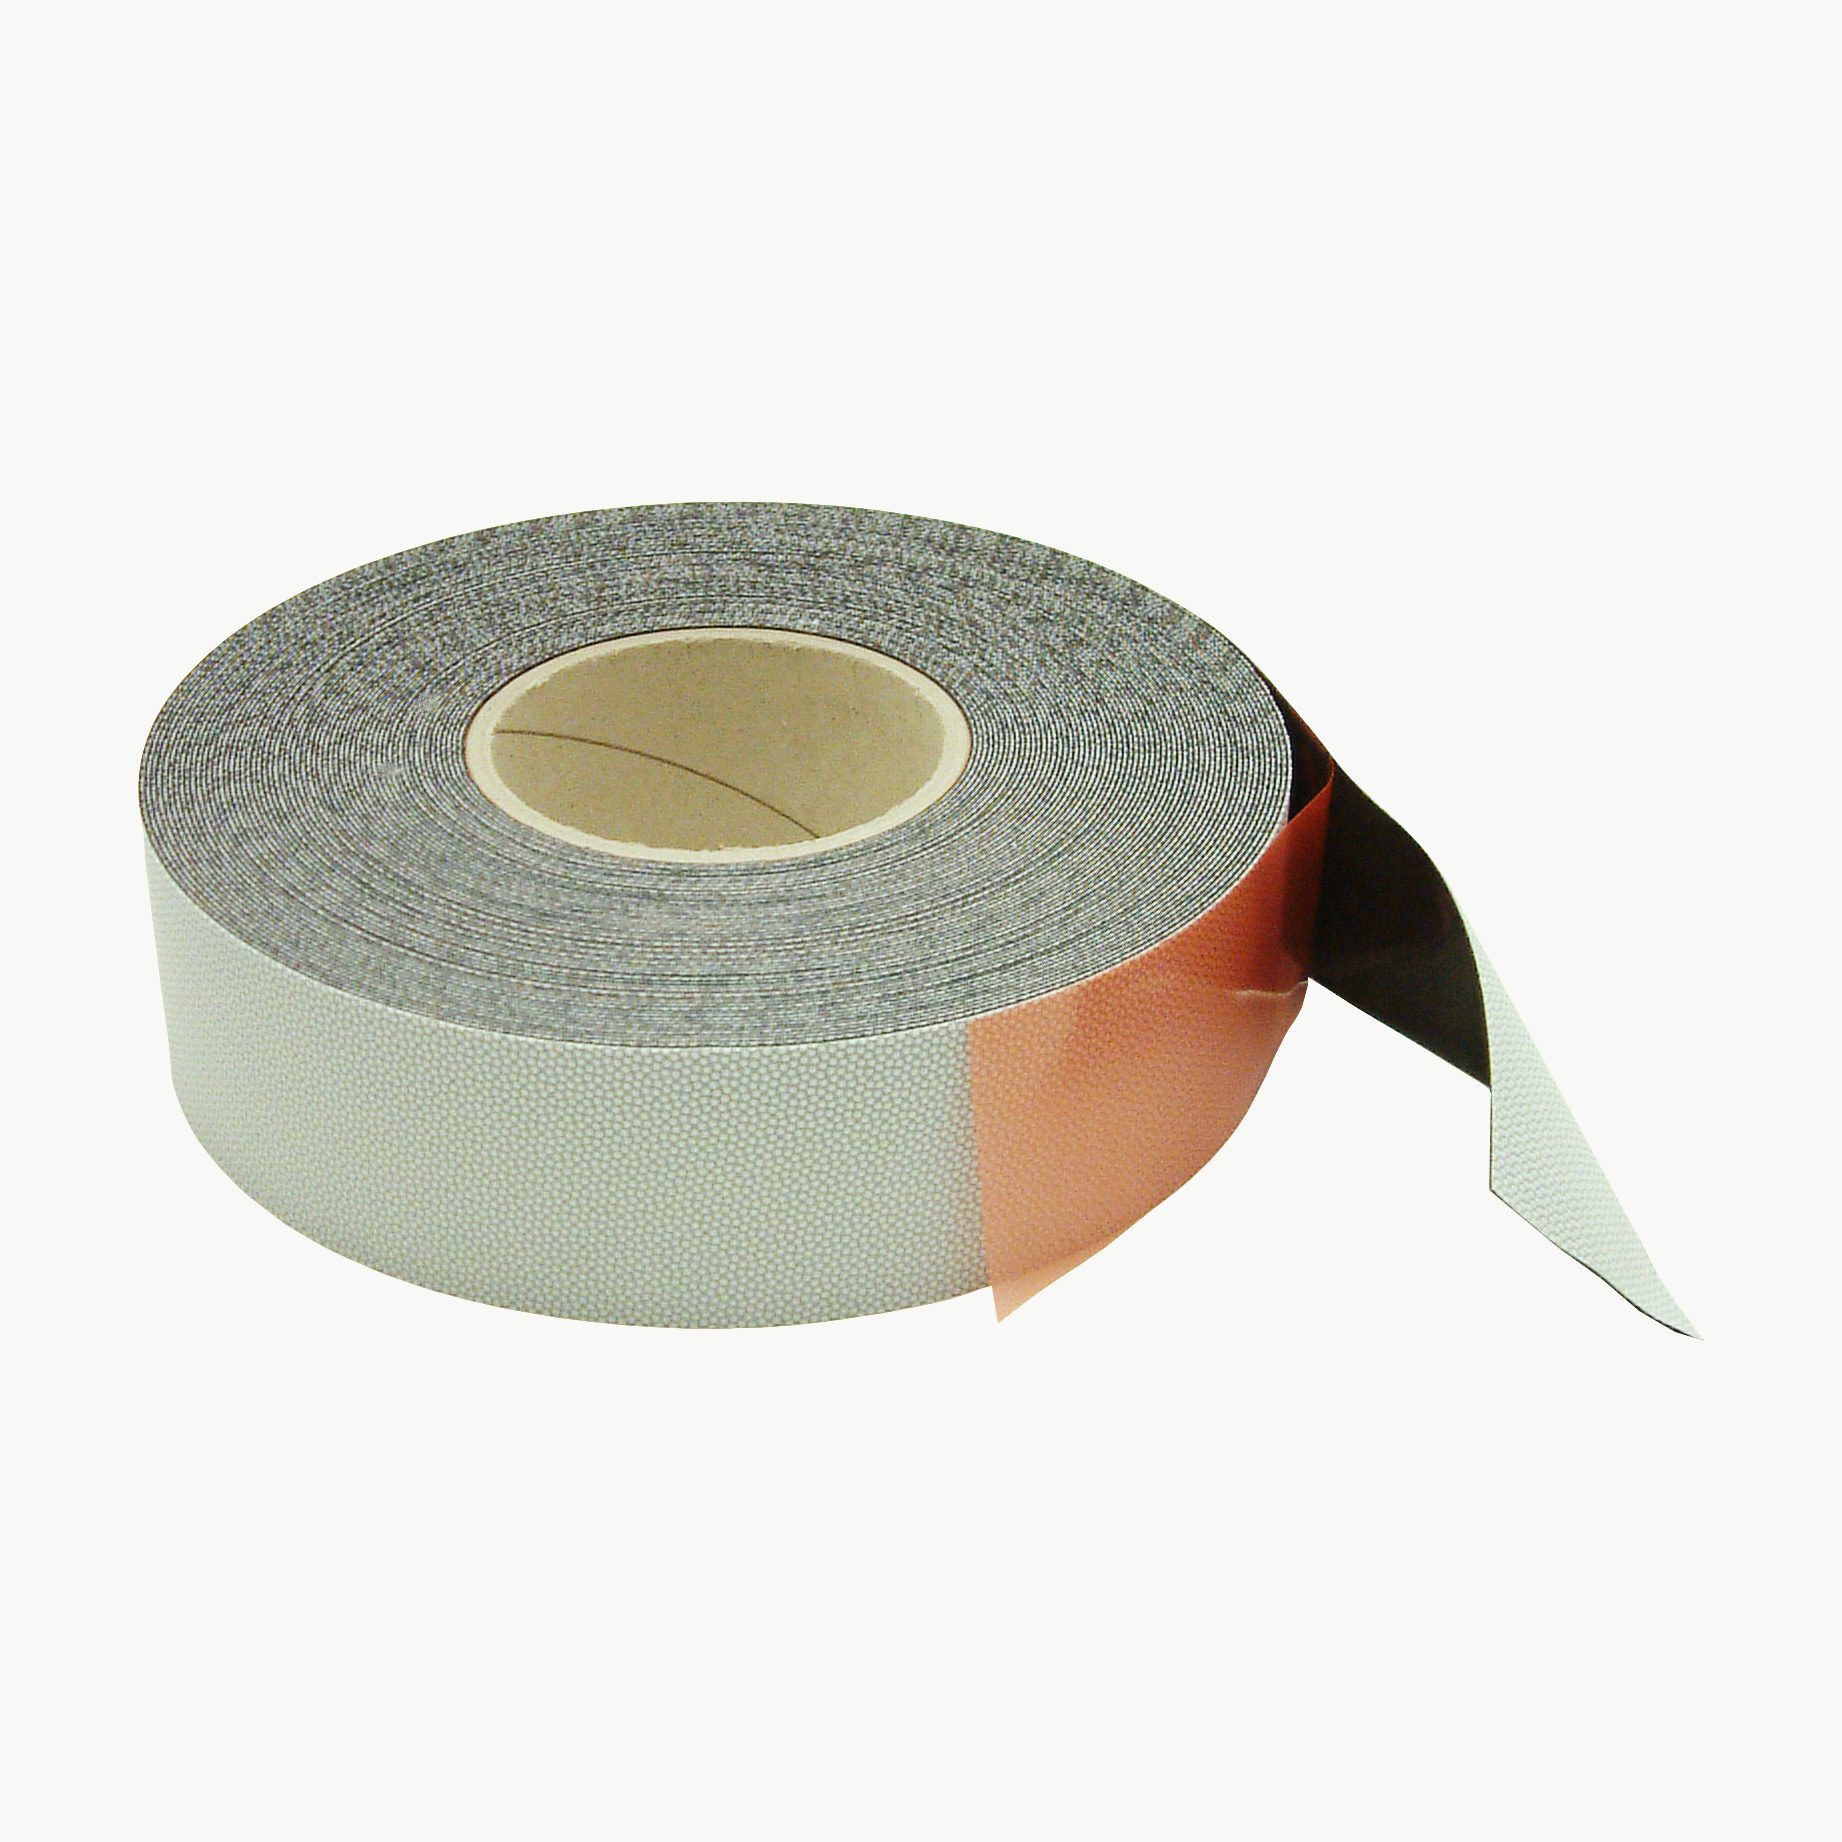 JVCC Roller Wrap Tape [Dimpled Siliconized Cloth] (RW-32)